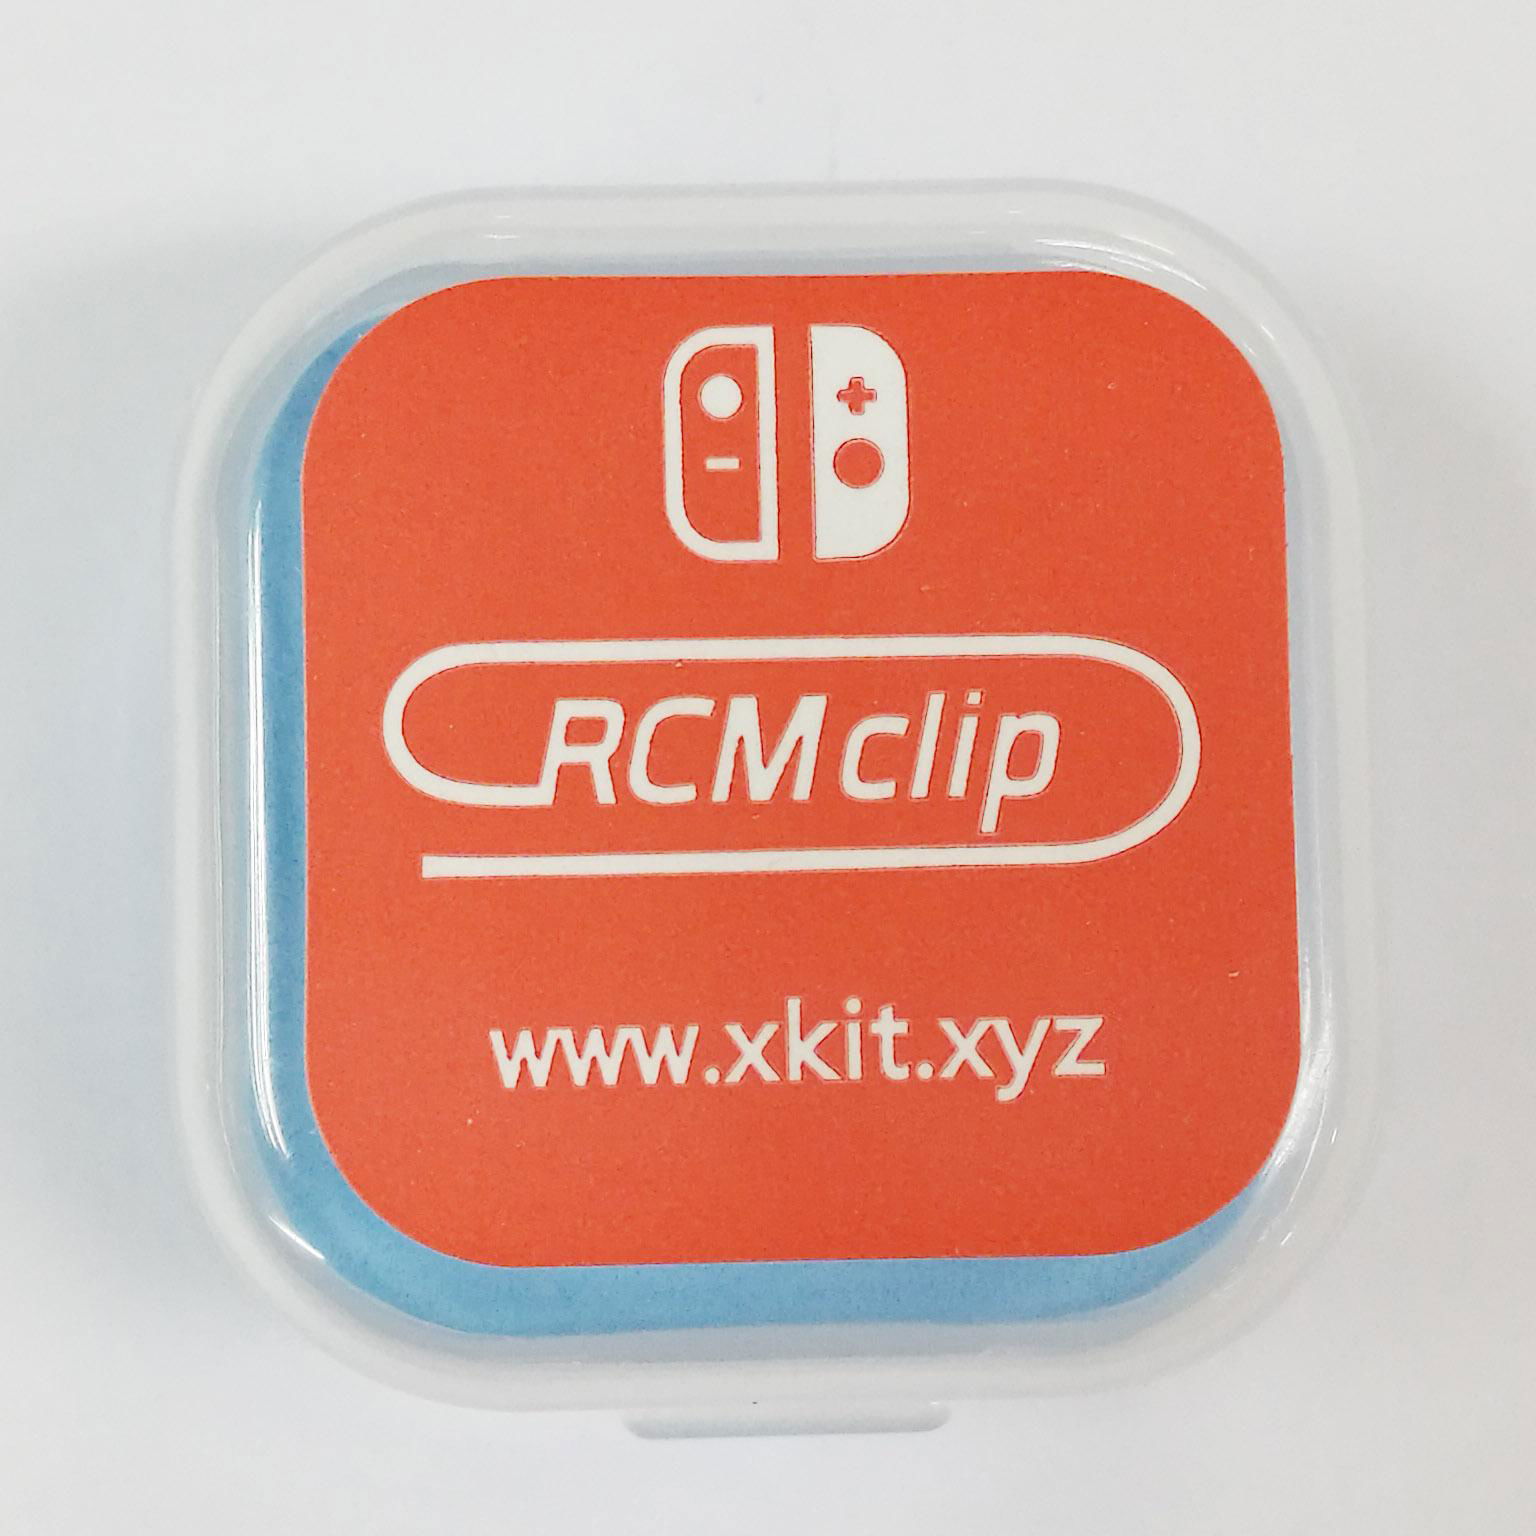 Nintendo Switch RCM Clip for Nintendo Switch Accessories